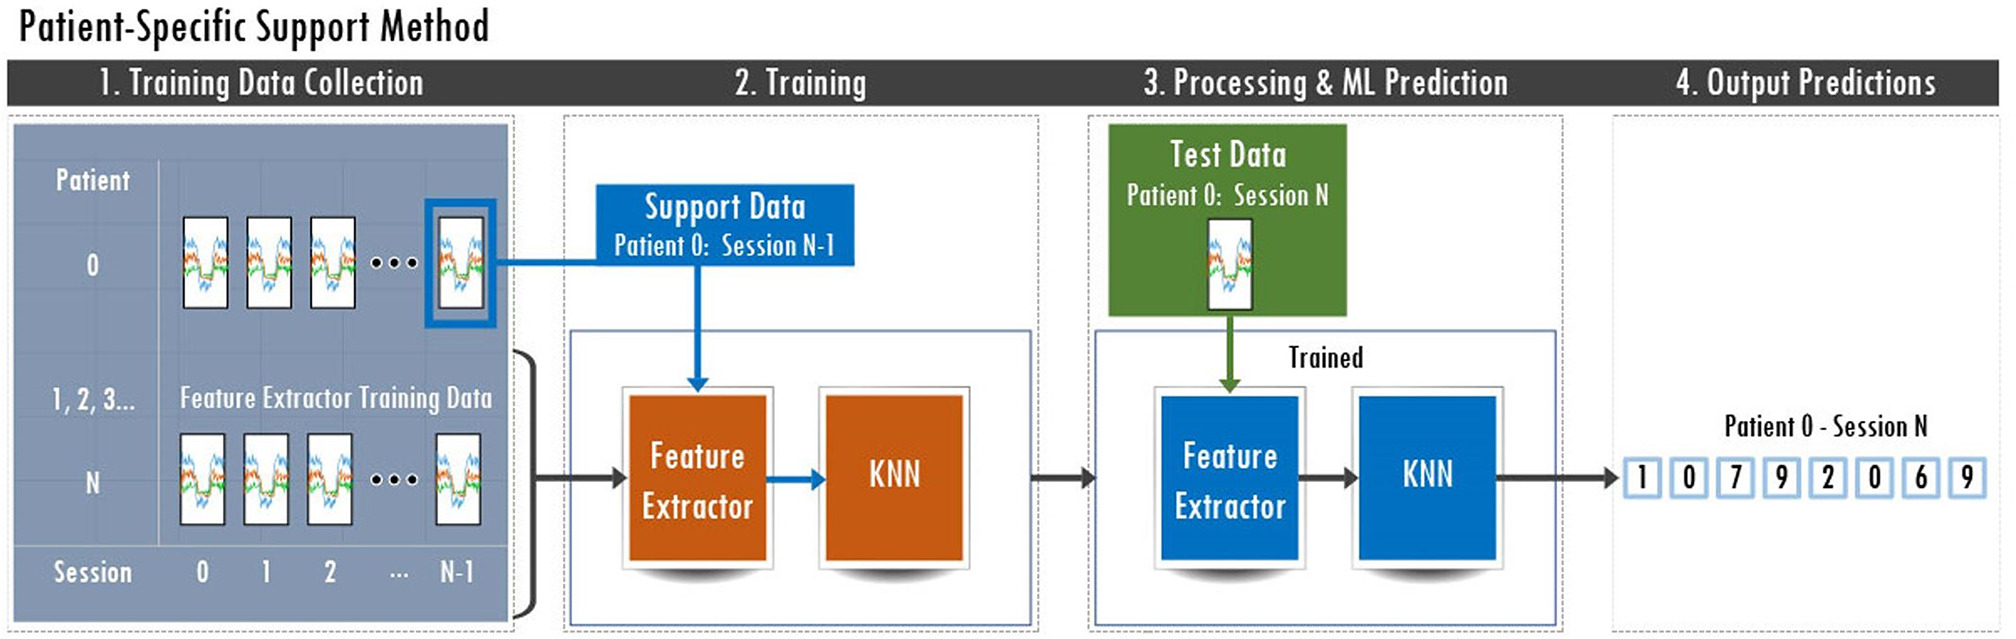 Fig. 2 
            Patient-specific support method. In stage 1, Patient 0 is in the test split of the cross-validation fold. In stage 2, a feature extractor (e.g. fully convolutional network) is trained on the training split, while the last test fold session is used as ‘support’ data to train a K-Nearest Neighbour (KNN) algorithm on this more limited, but patient-specific, distribution. In stage 3, the data of the patient’s test session are transformed by the trained feature extractor and passed as input to the trained KNN algorithm to output the predictions of stage 4.
          